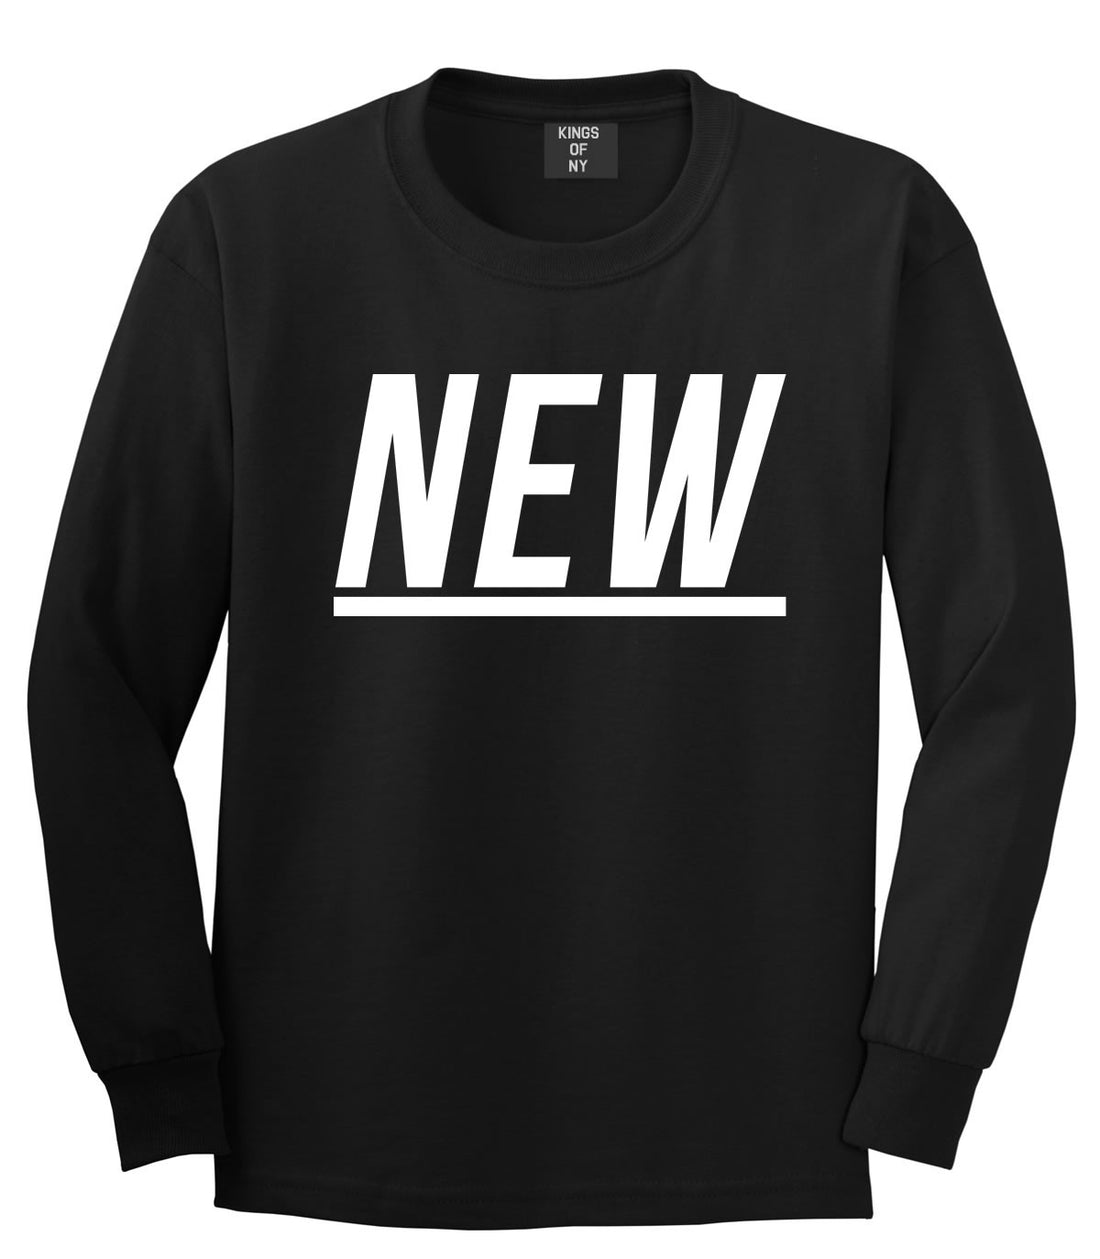 New Long Sleeve T-Shirt in Black by Kings Of NY